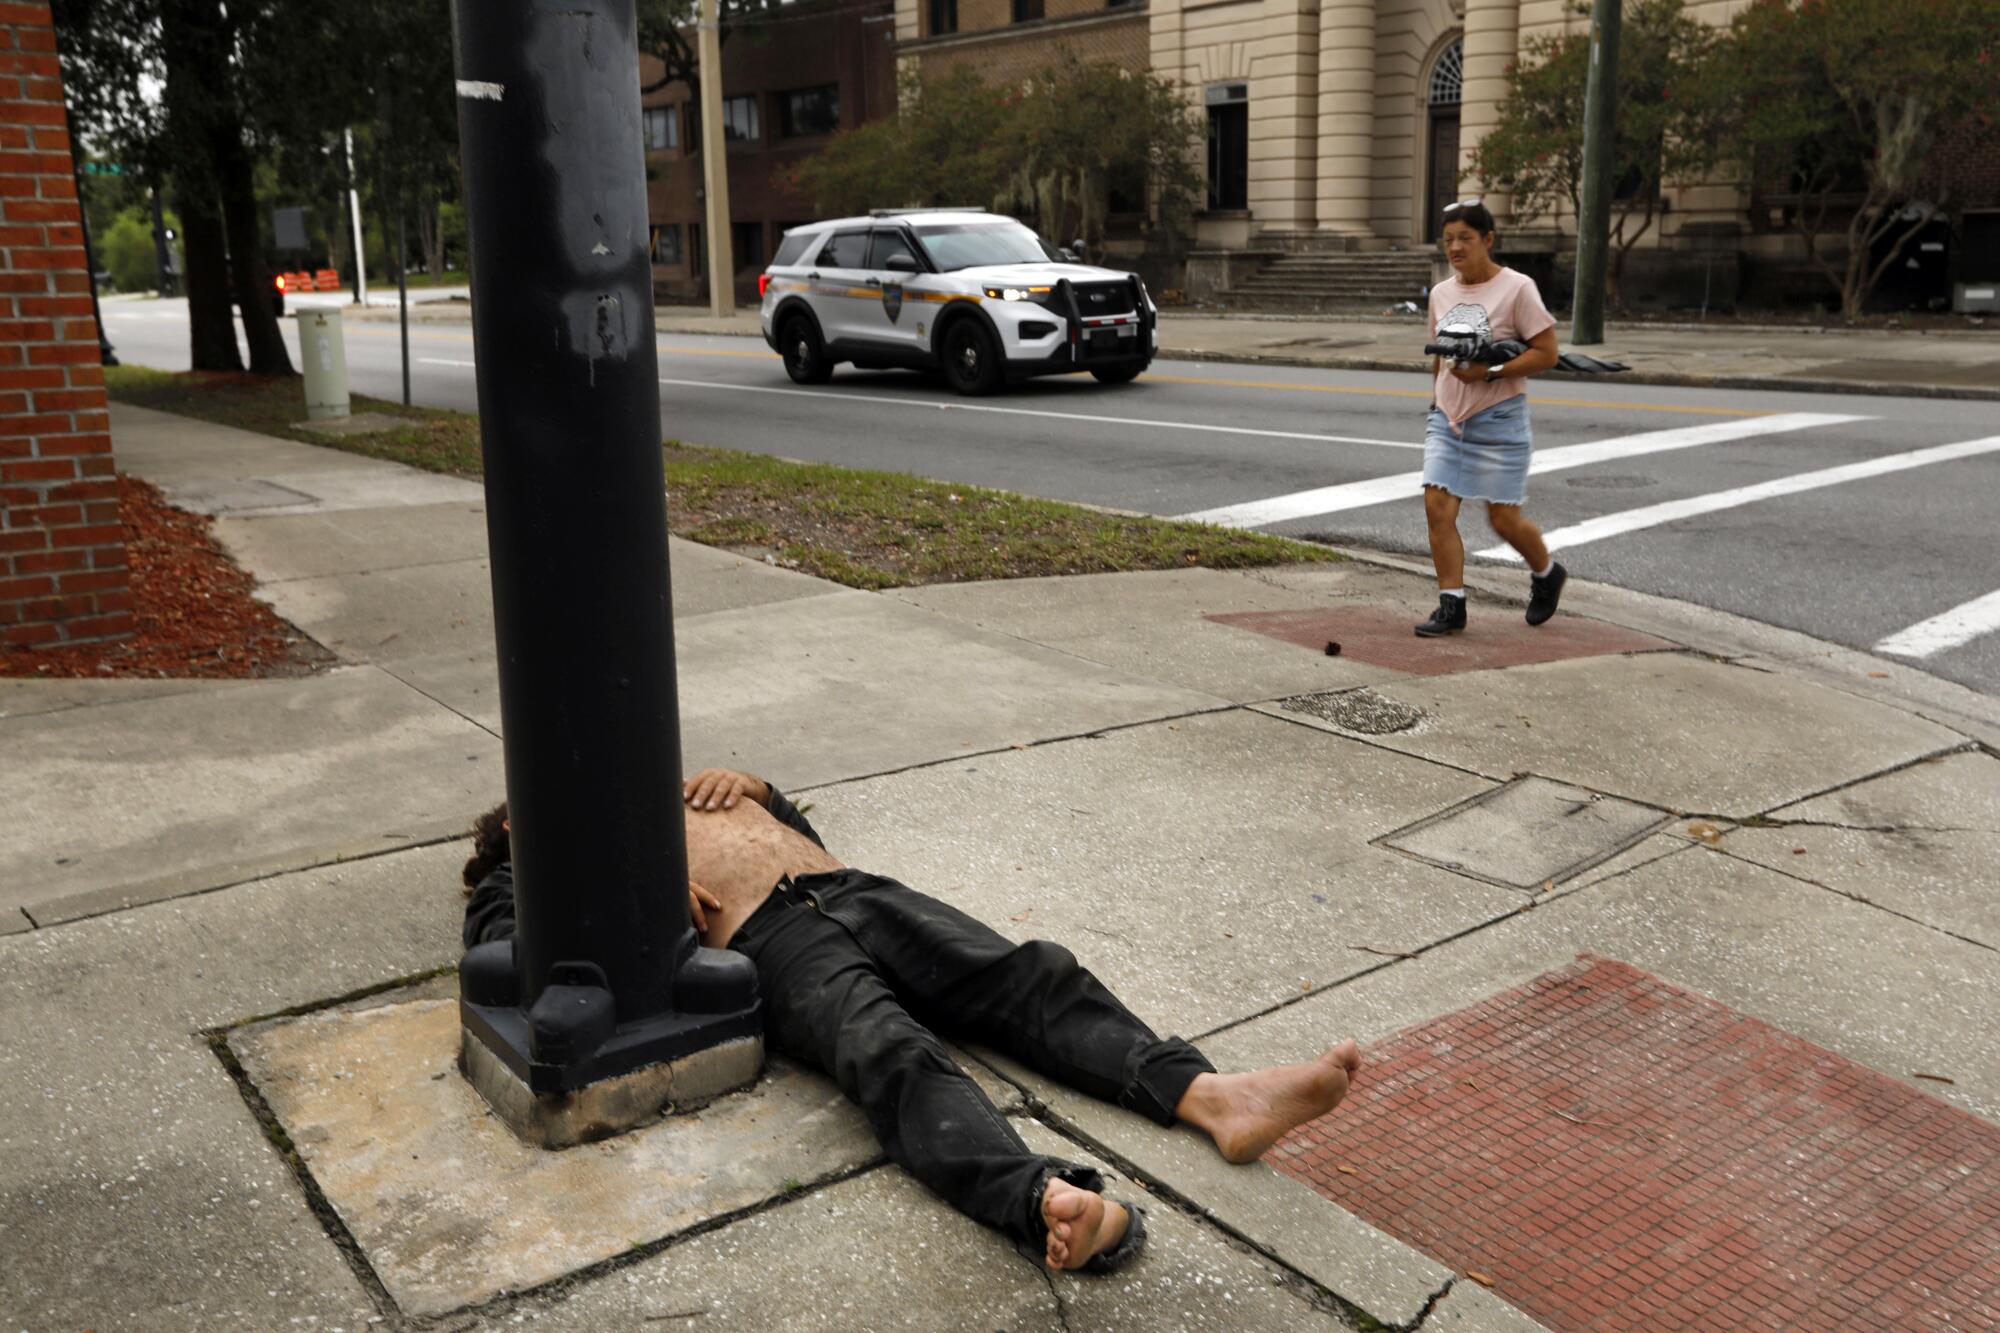 A man walks onto a street corner, near a shirtless person in dark pants lying next to a pole 